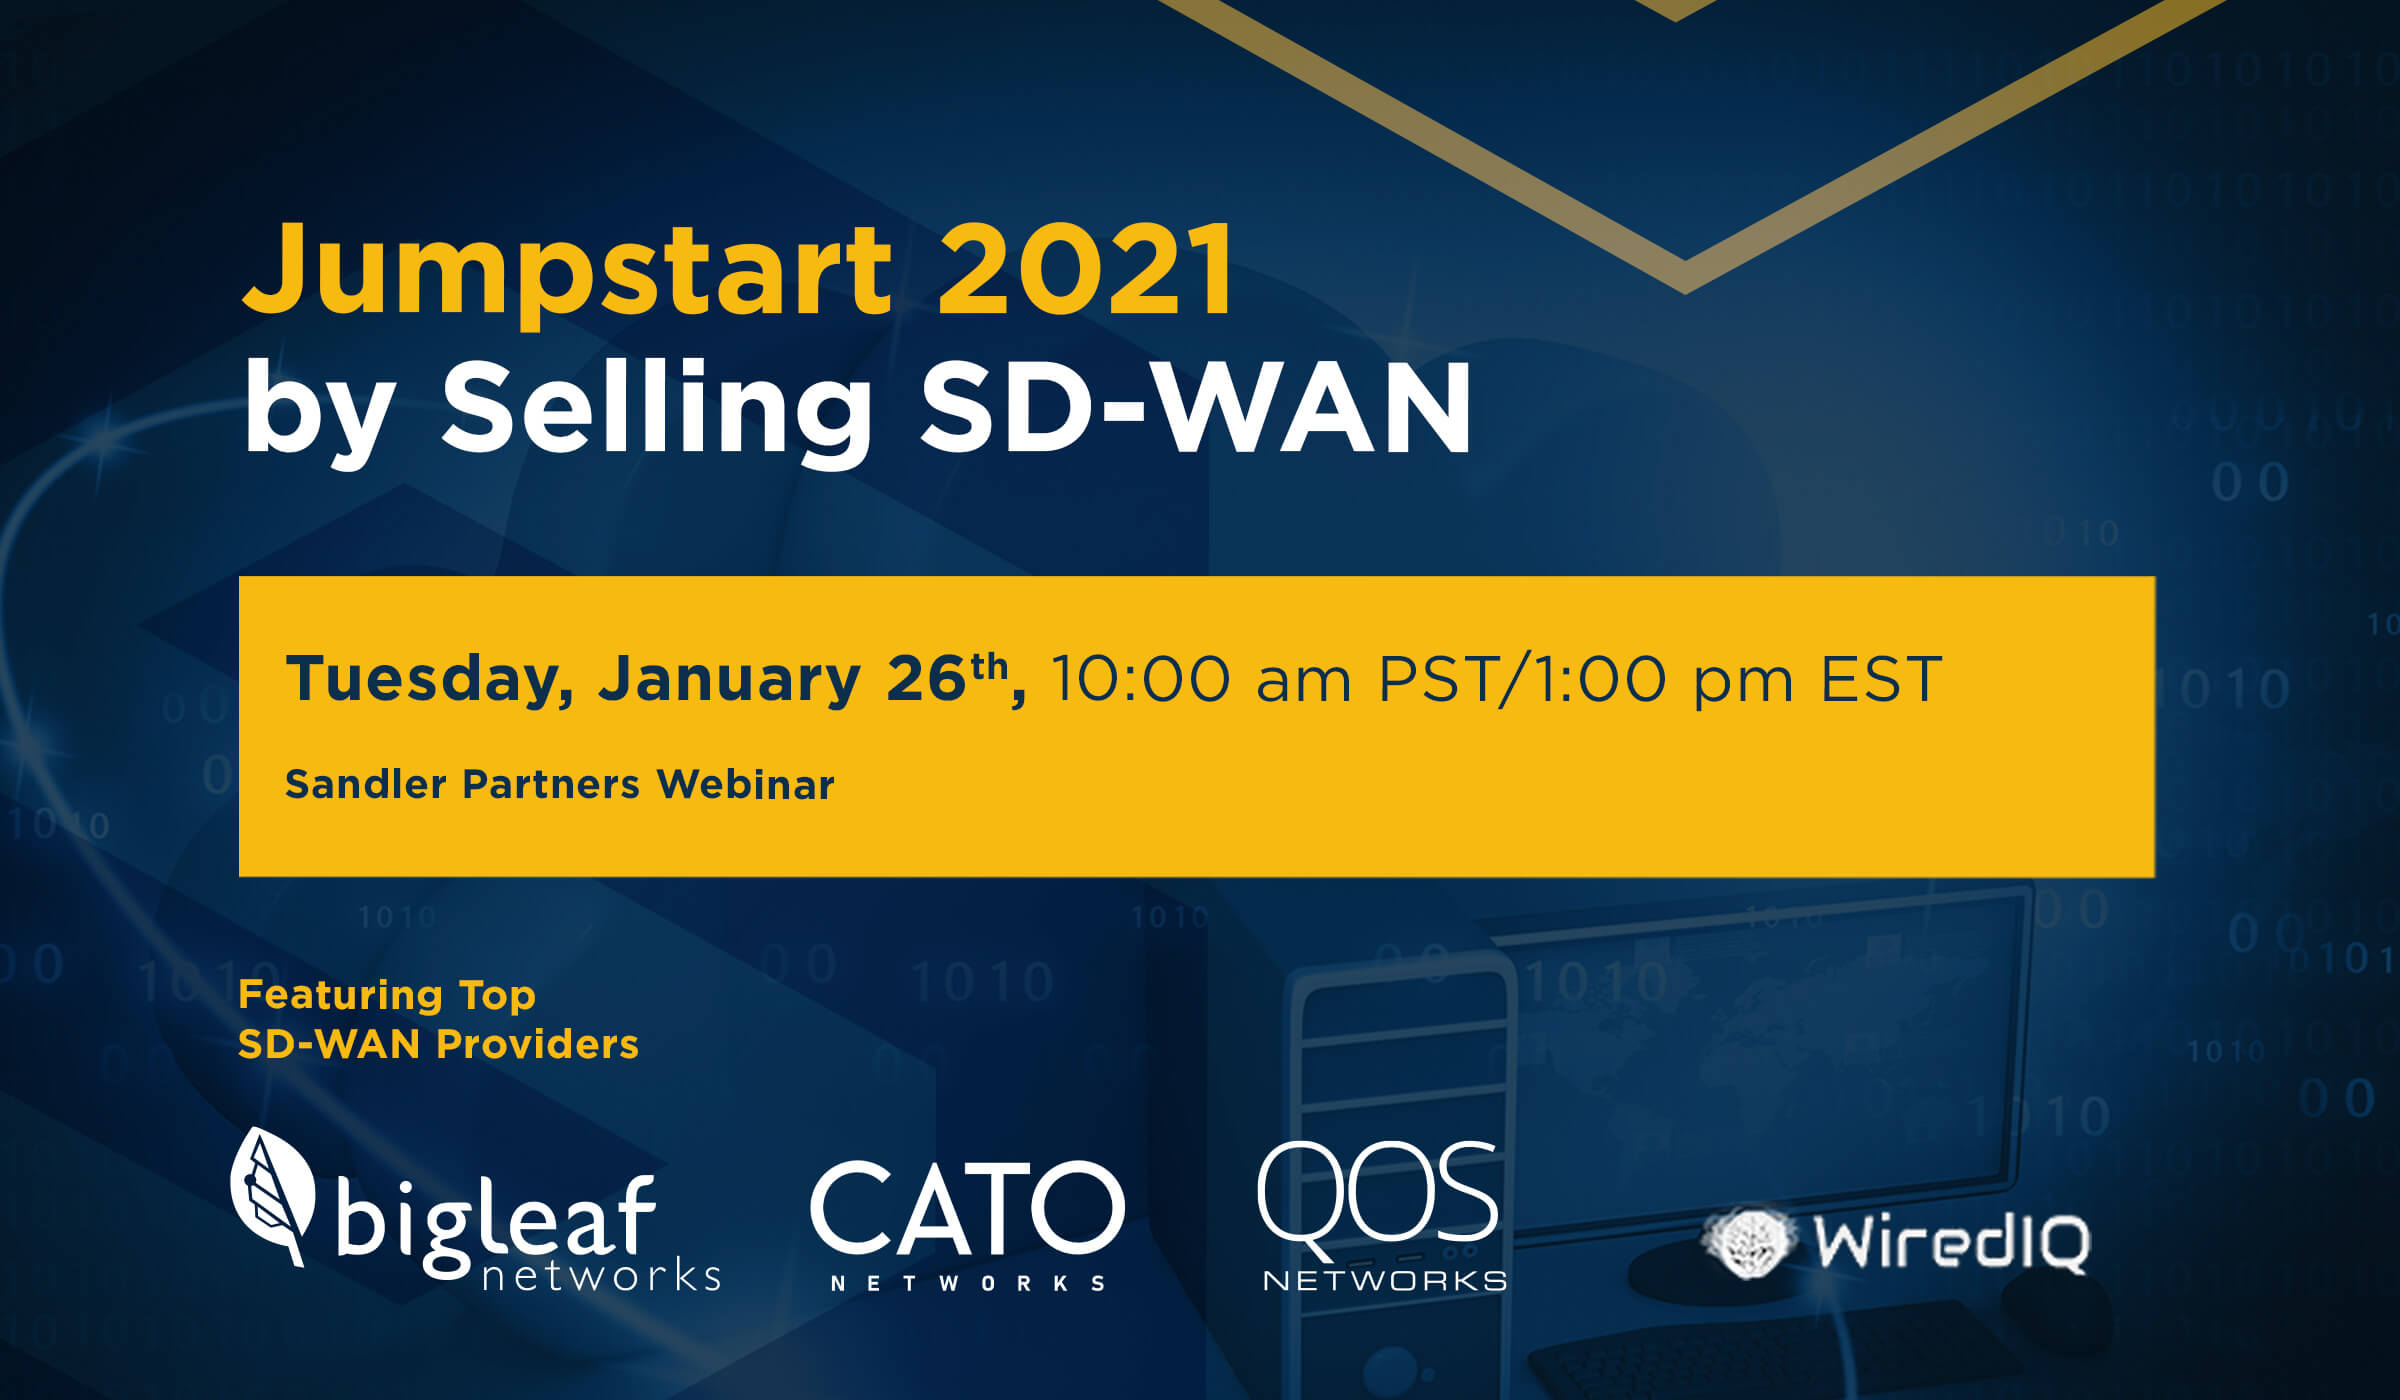 Jumpstar 2021 by Selling SD-WAN